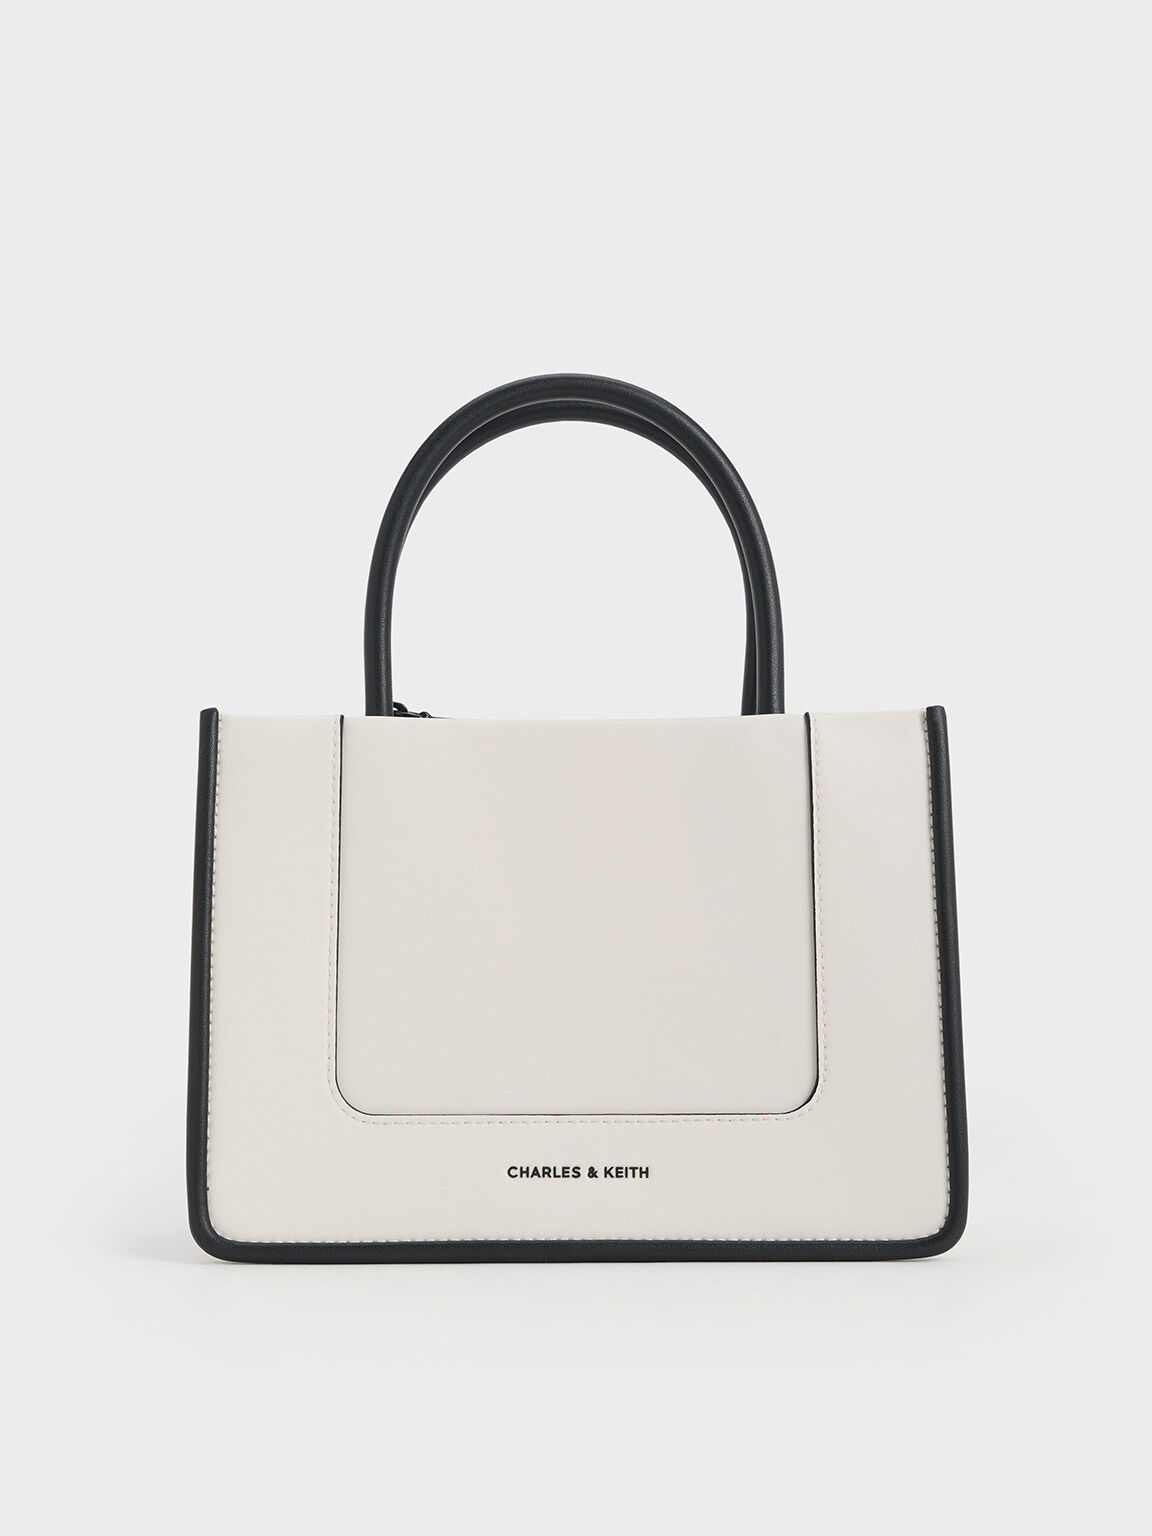 White Bags - Buy Trendy White Bags Online in India | Myntra